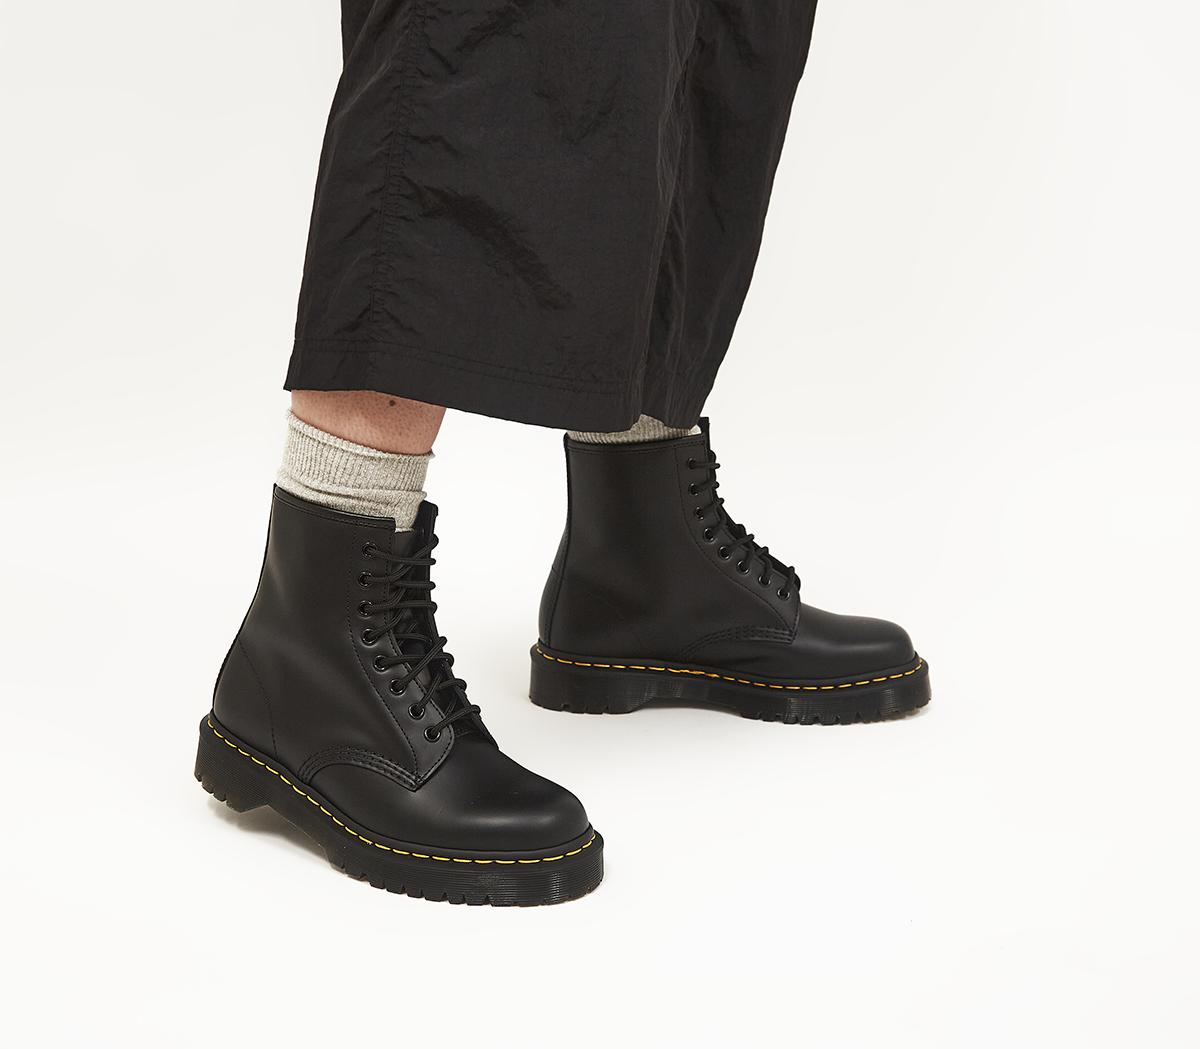 Dr. Martens Bex 8 Eye Boots Black - Ankle Boots